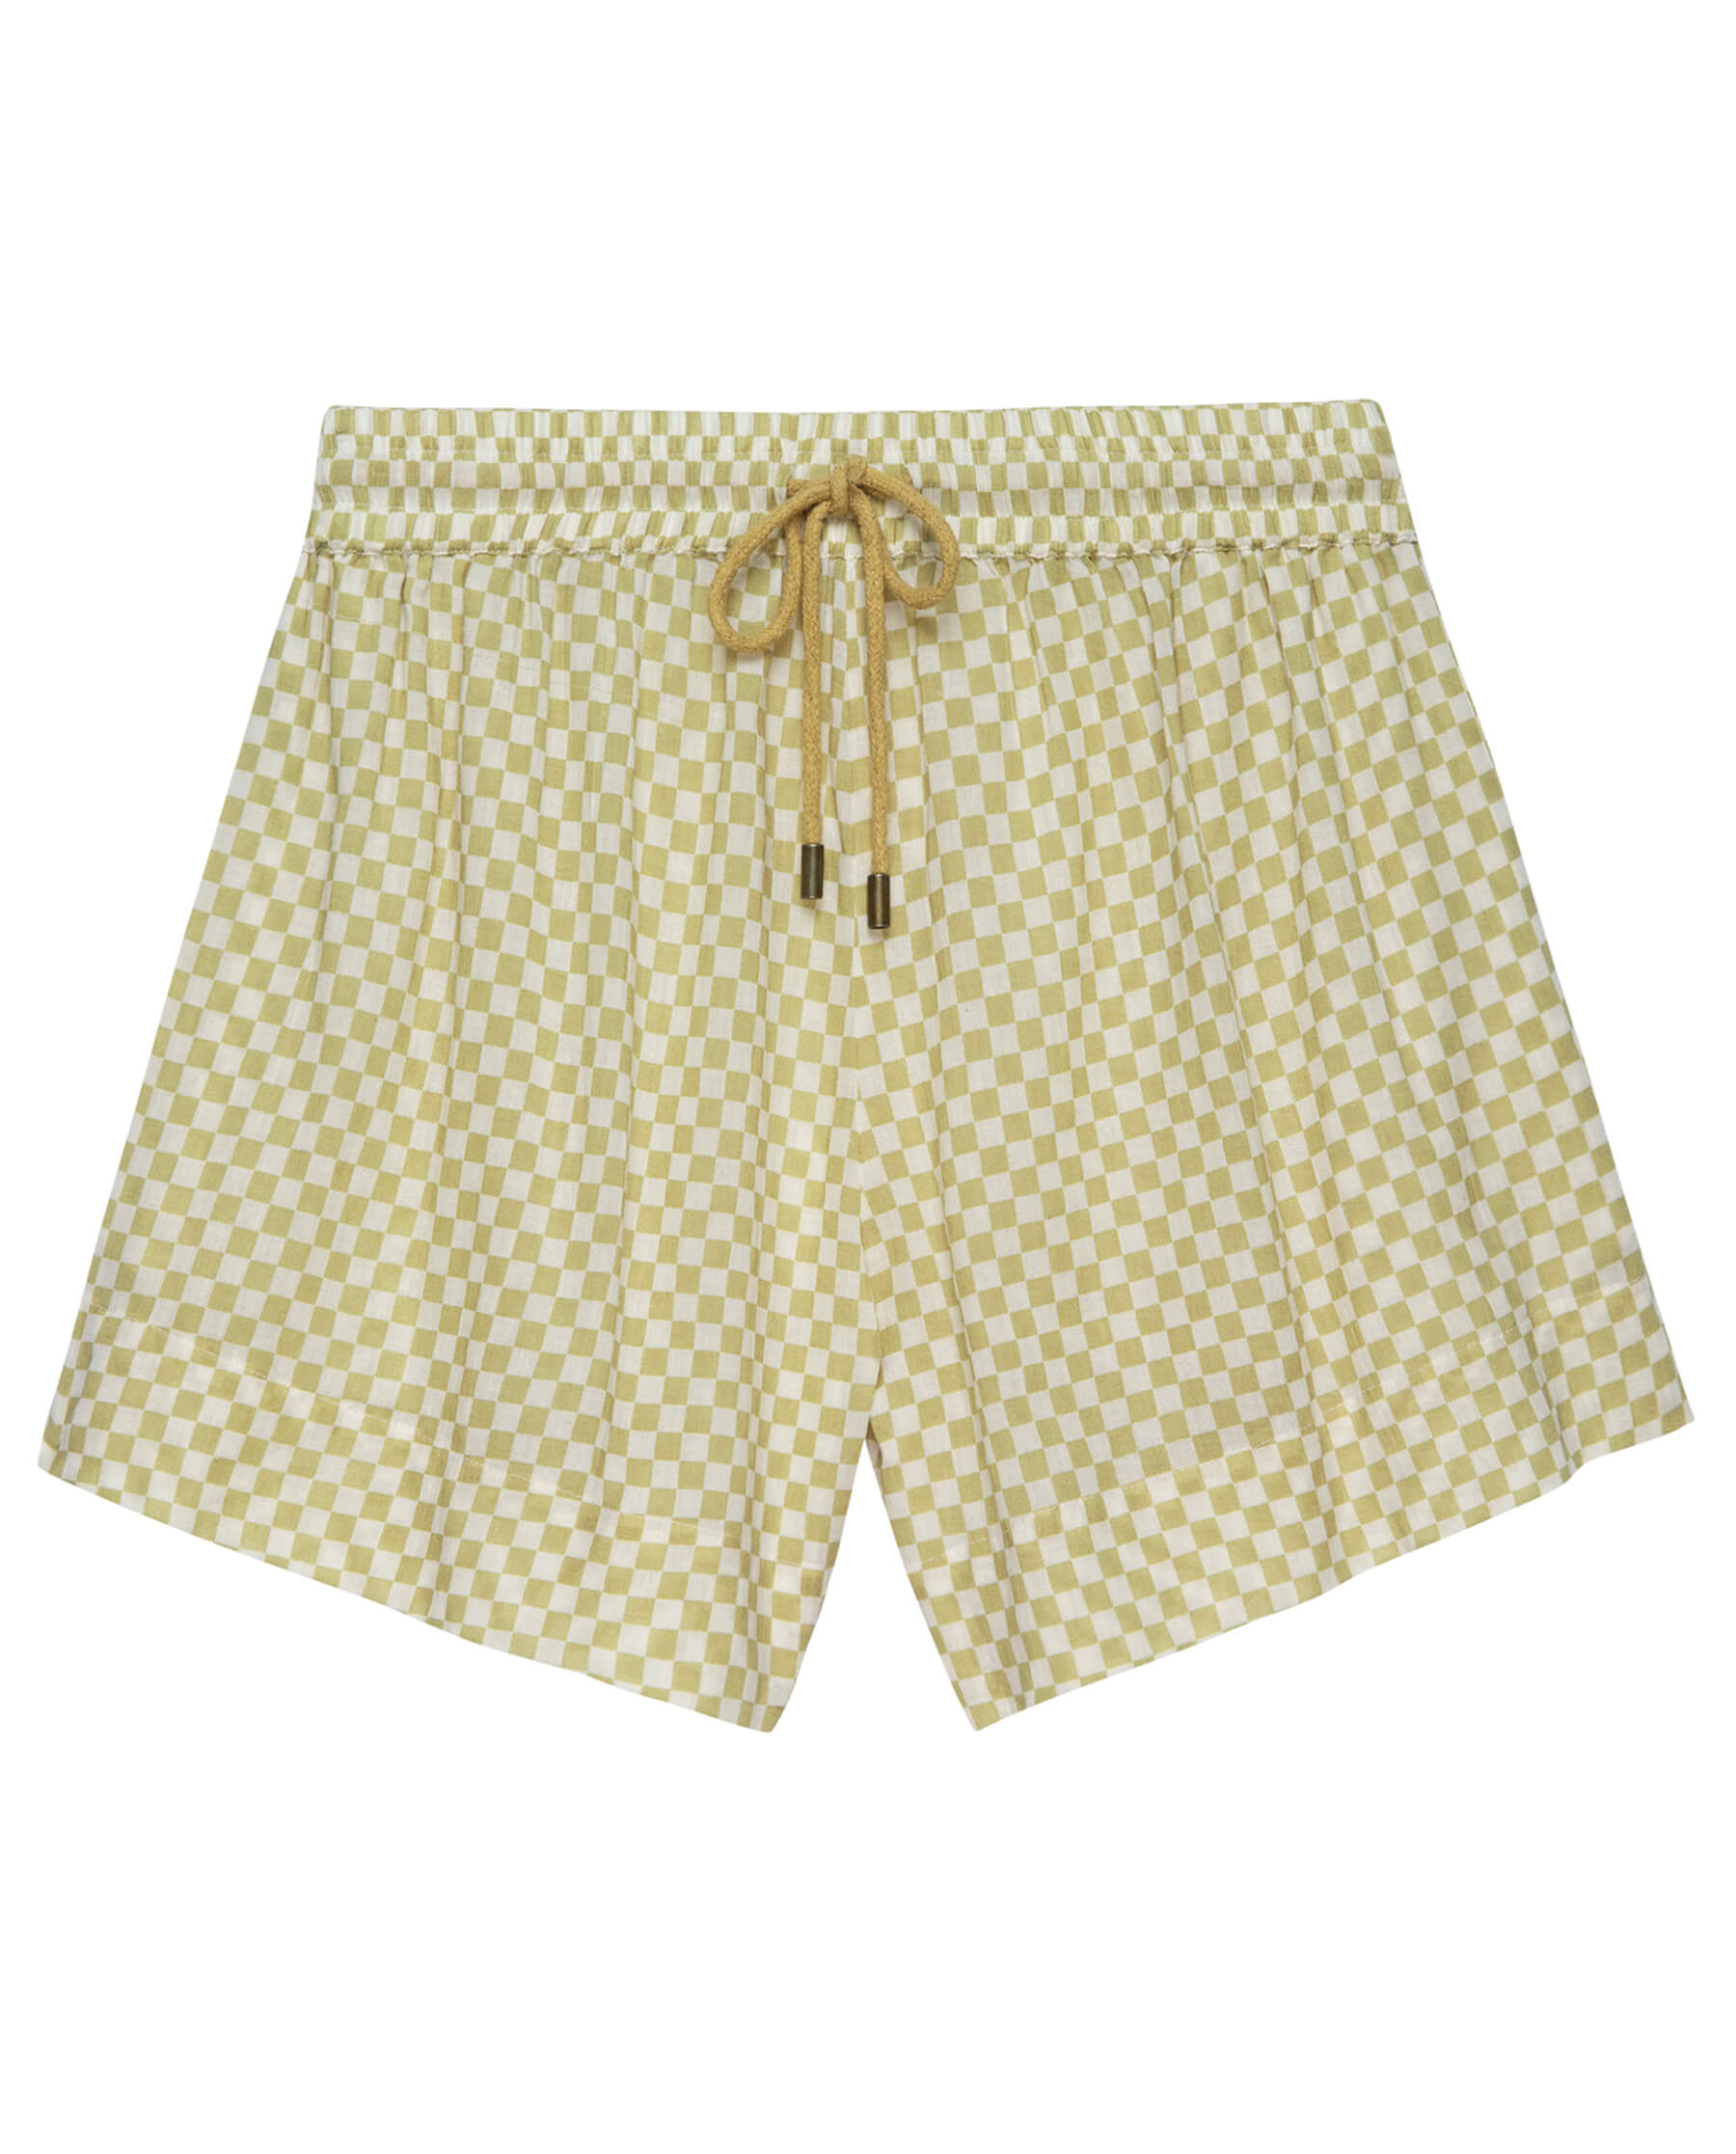 The Delta Short. -- Sand Check COVER-UP SHORTS THE GREAT. SP24 SWIM